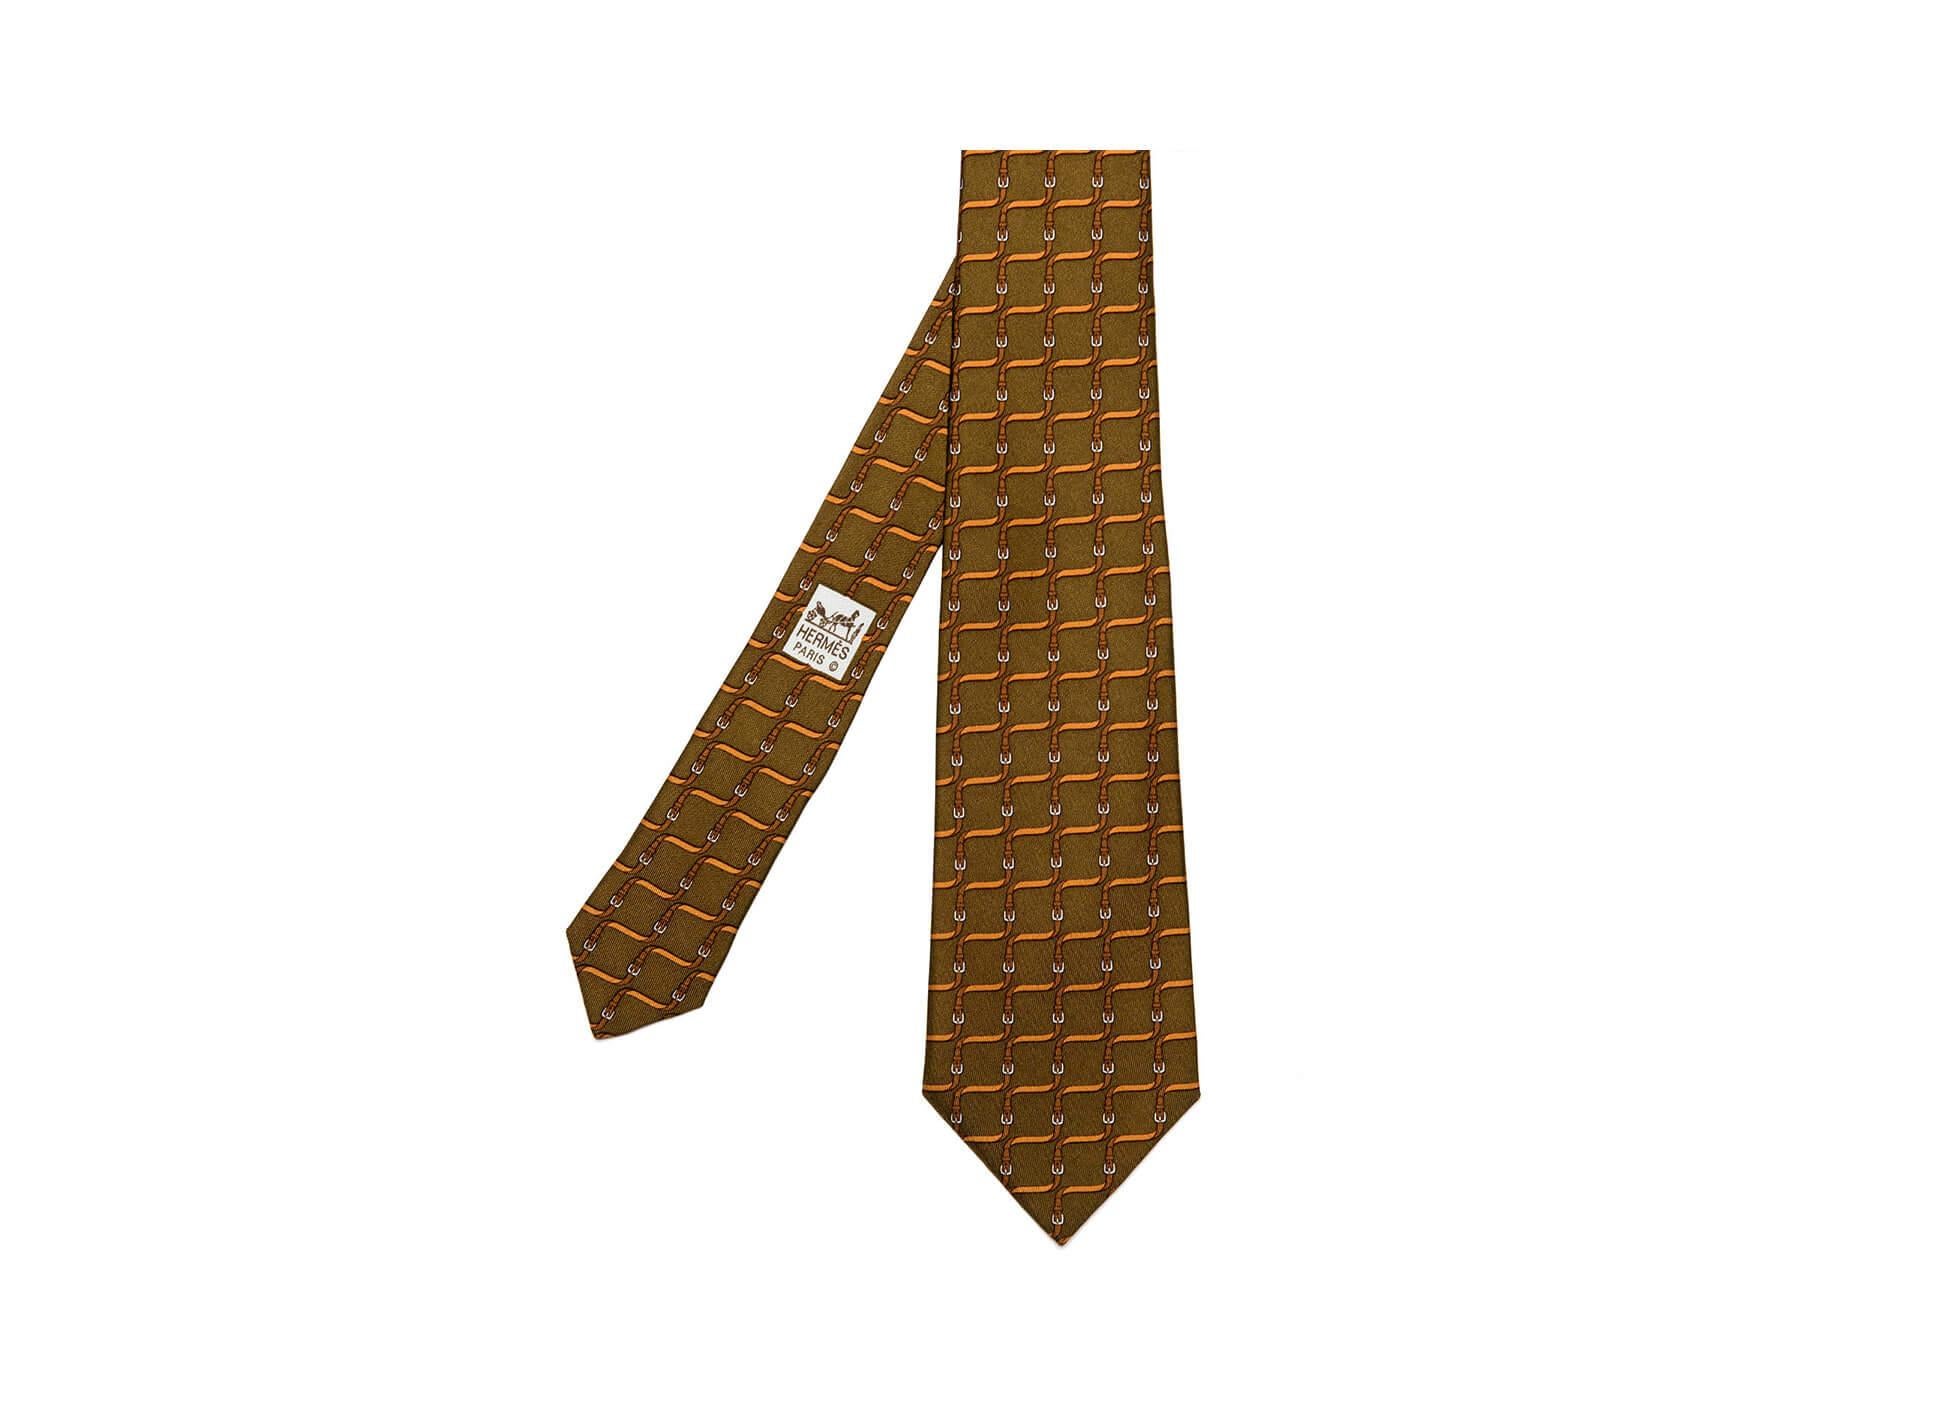 A Pristine Hermes Vintage Silk Tie.'Straps & Buckles' is a classic Hermes design with an equine theme.